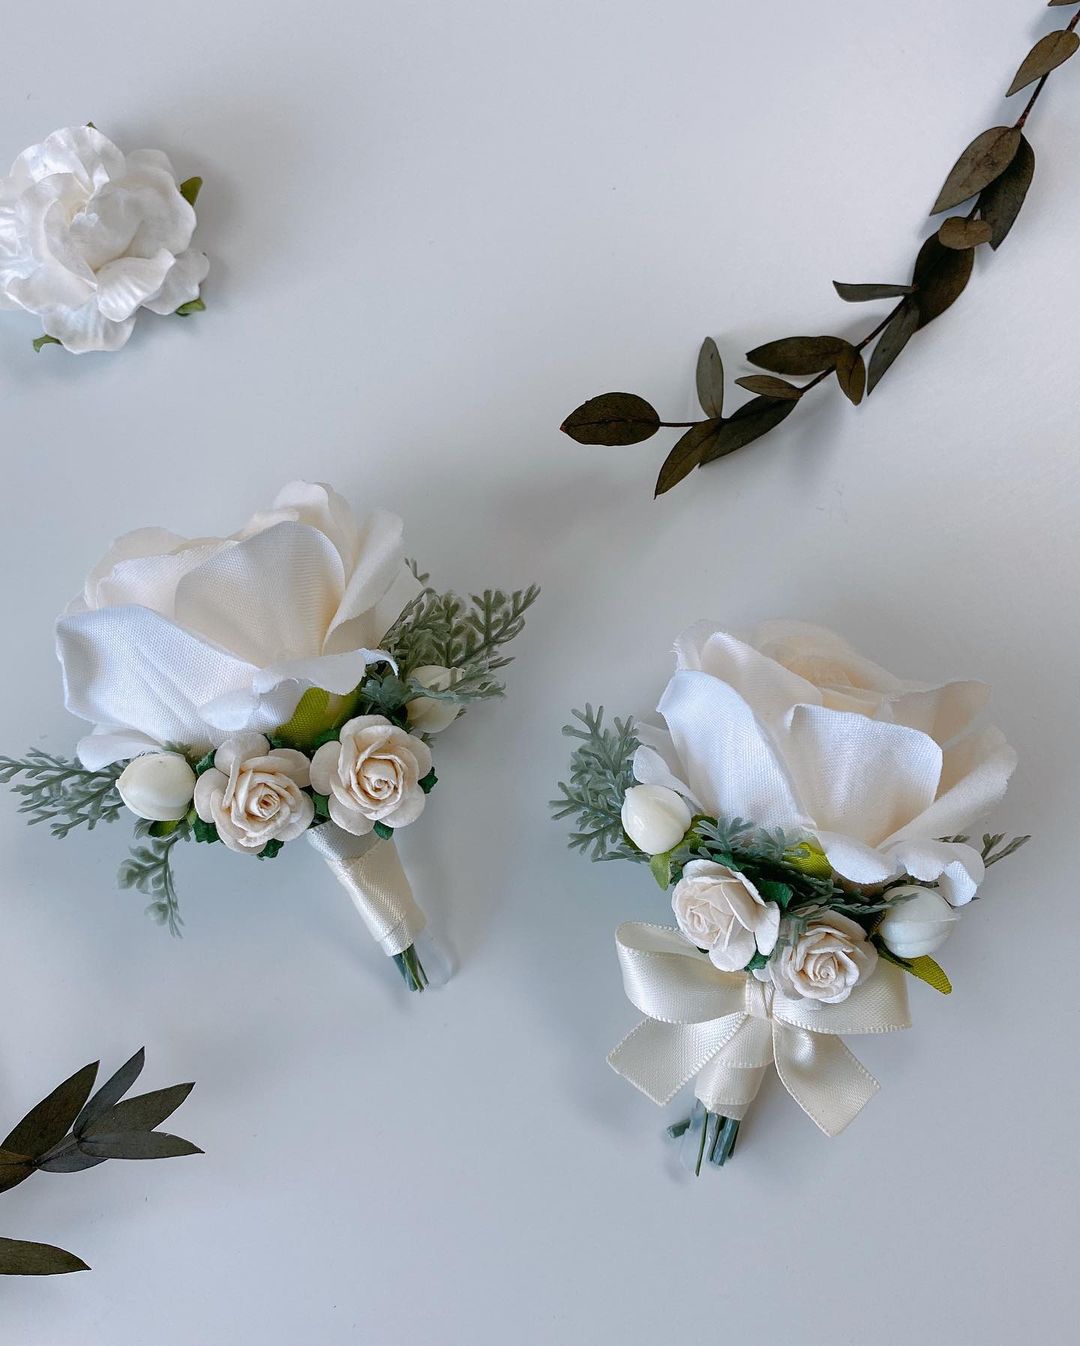 Eden Bridegroom Corsage Wedding Props -R220 is a corsage made of artificial flowers for weddings and other events. Corsage consists of white roses, violets and leaves and is adorned with a metal frame. Big enough for your guests to take pictures and keep. It&